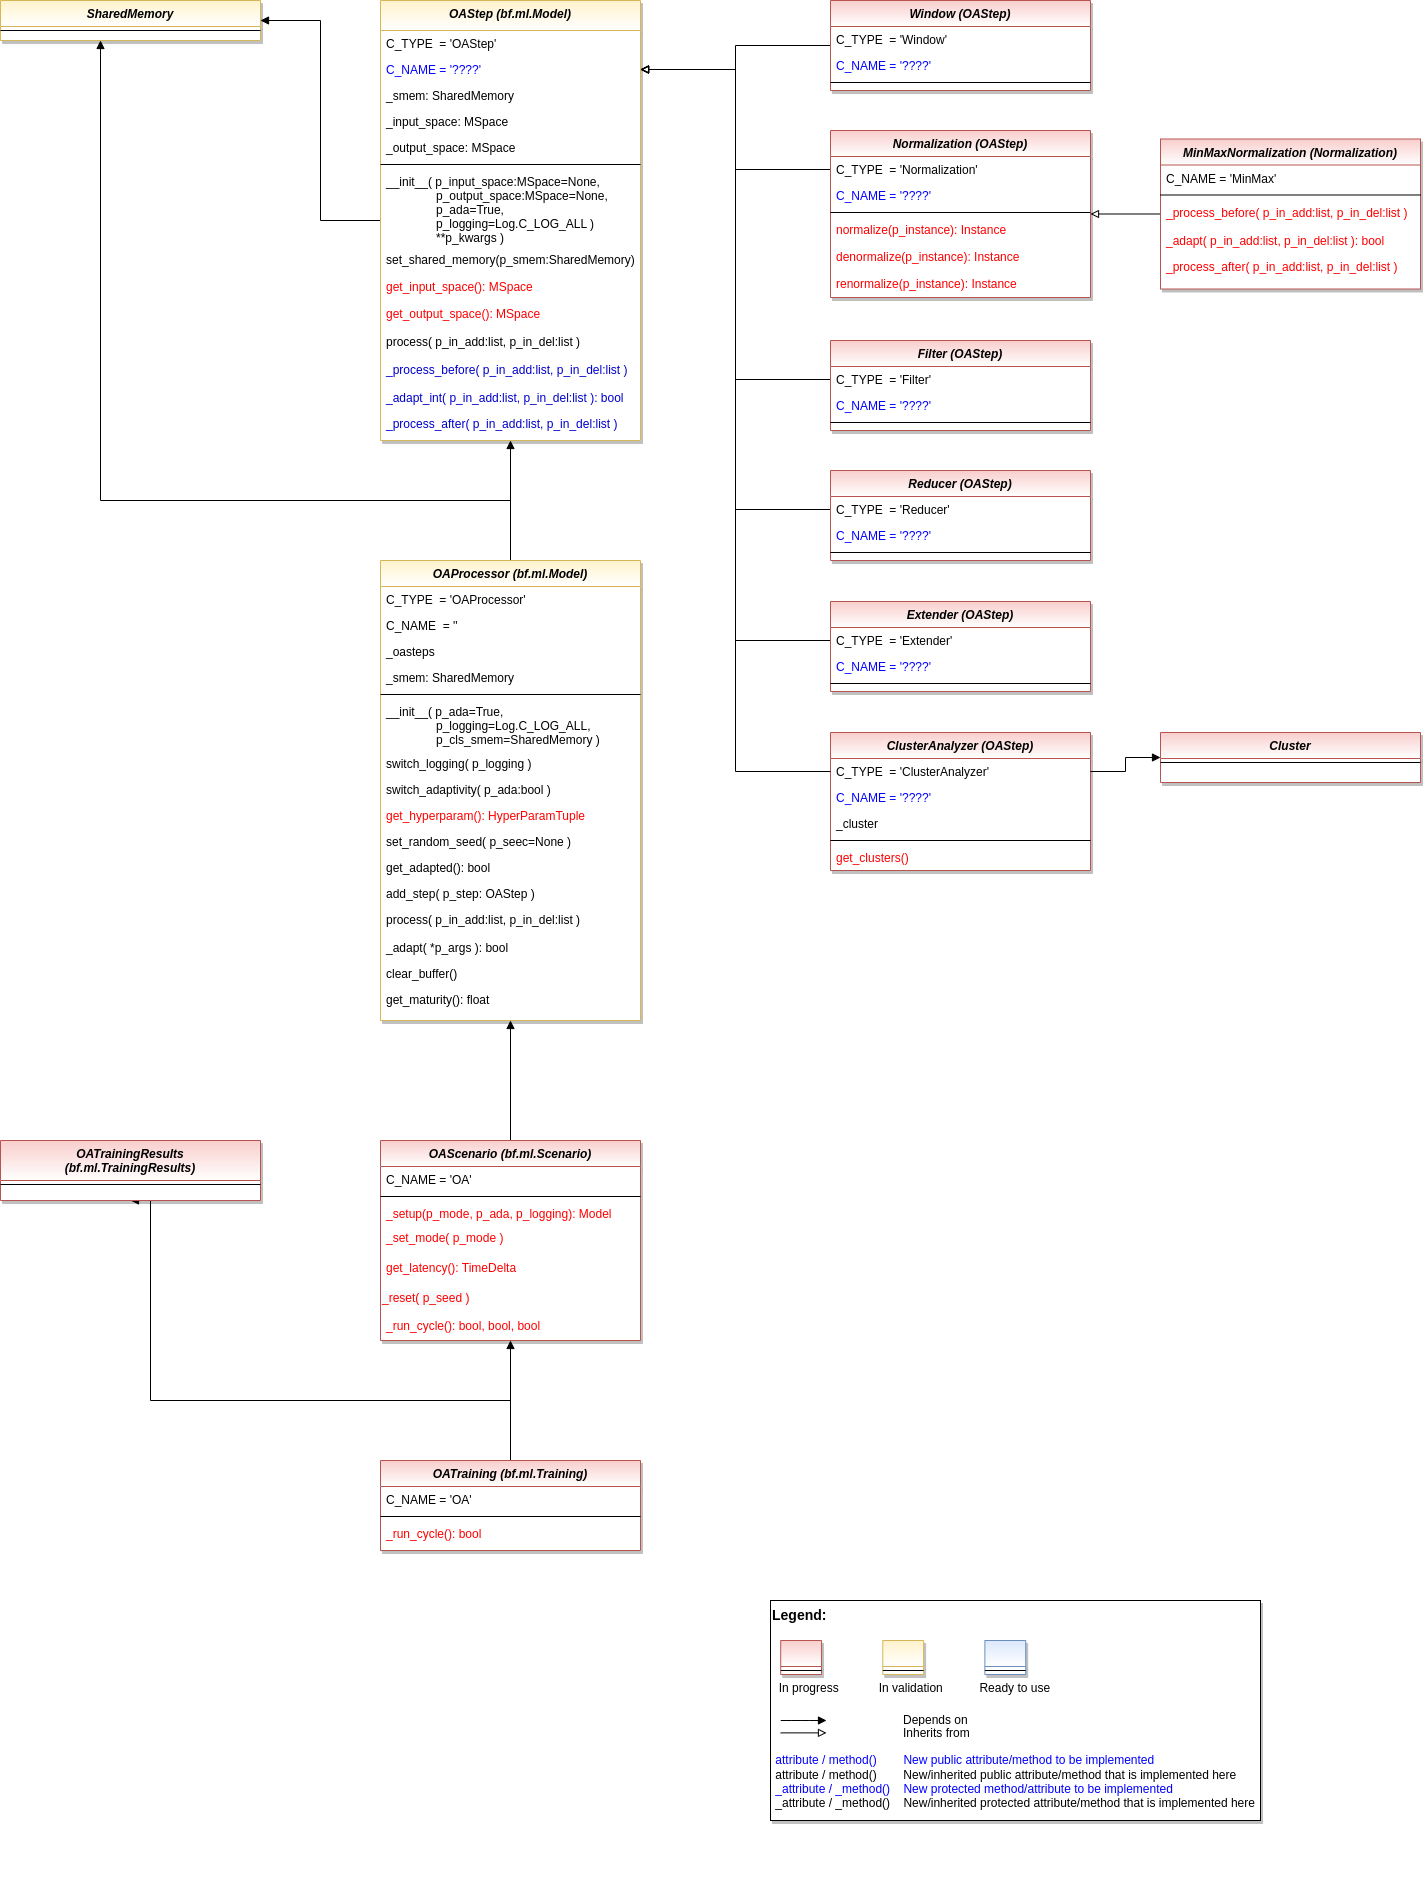 ../../../_images/MLPro-OA-Proc_class_diagram.drawio.png